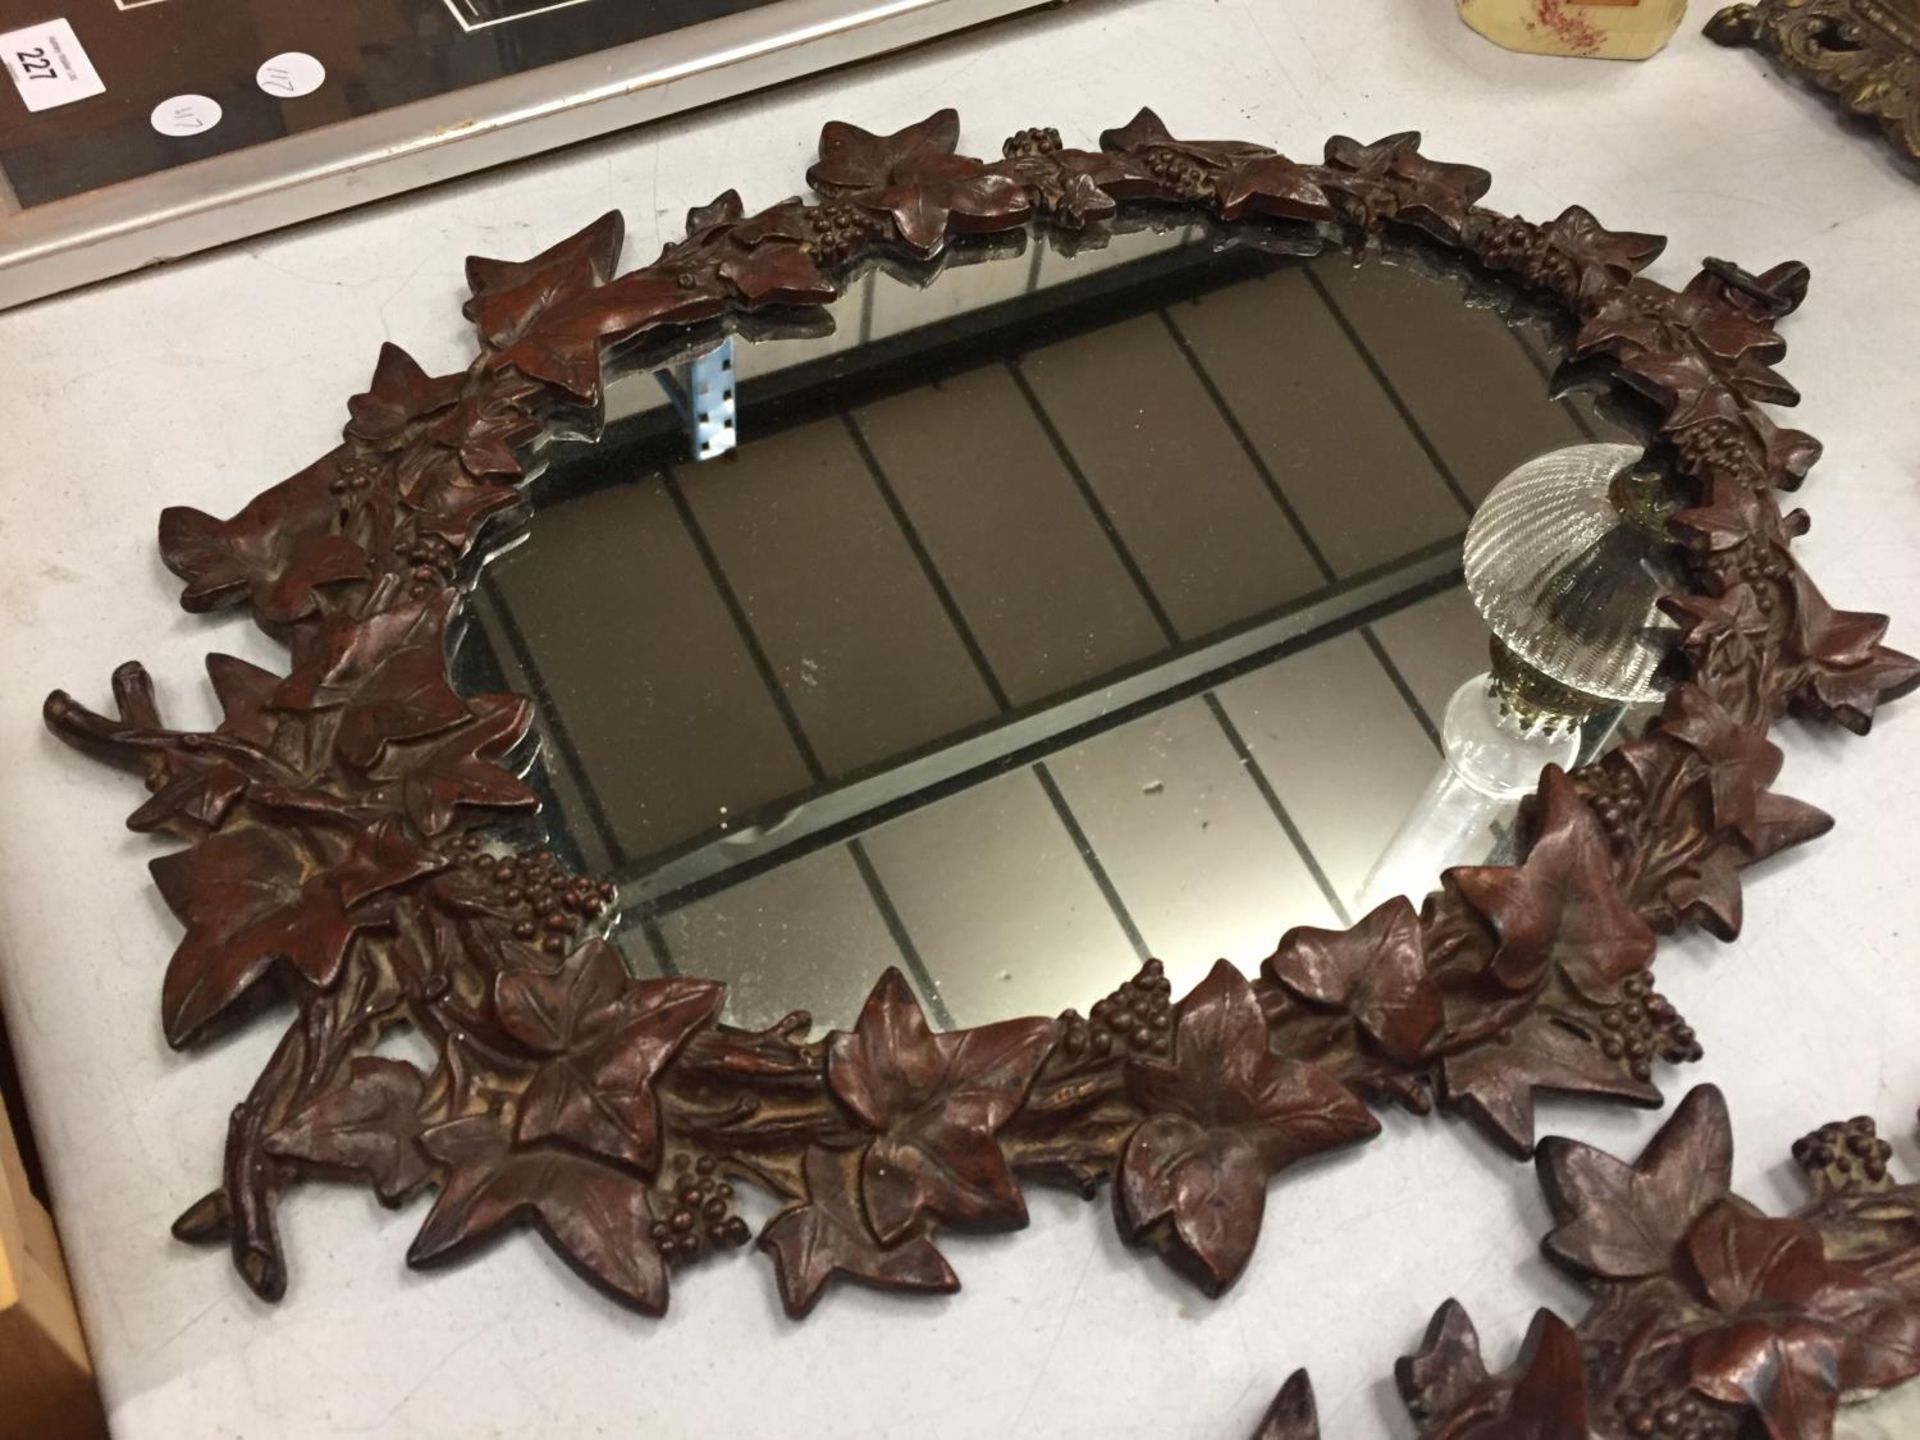 A PAIR OF HEAVY MATCHING WALL MIRRORS WITH ORNATE LEAF DESIGN - Image 5 of 6